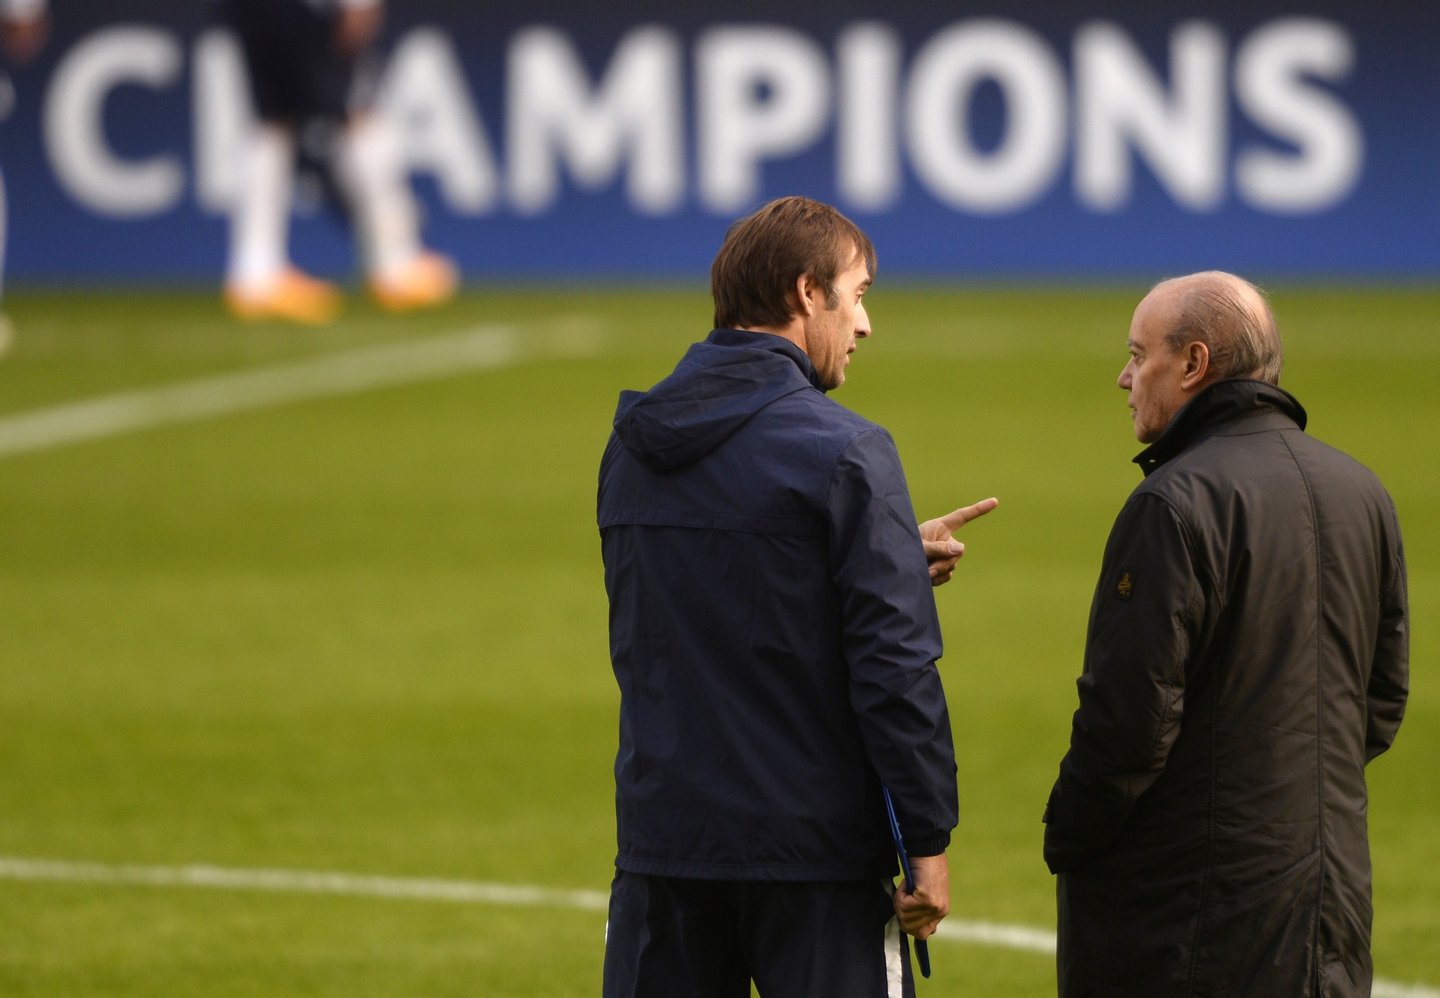 Porto's Spanish coach Julen Lopetegui (L) speaks with Porto's president Nuno Pinto da Costa during a training session at the Dragao Stadium in Porto on December 9, 2014, on the eve of the UEFA Champions League football match FC Porto vs Shakhtar Donetsk. AFP PHOTO / MIGUEL RIOPA (Photo credit should read MIGUEL RIOPA/AFP/Getty Images)